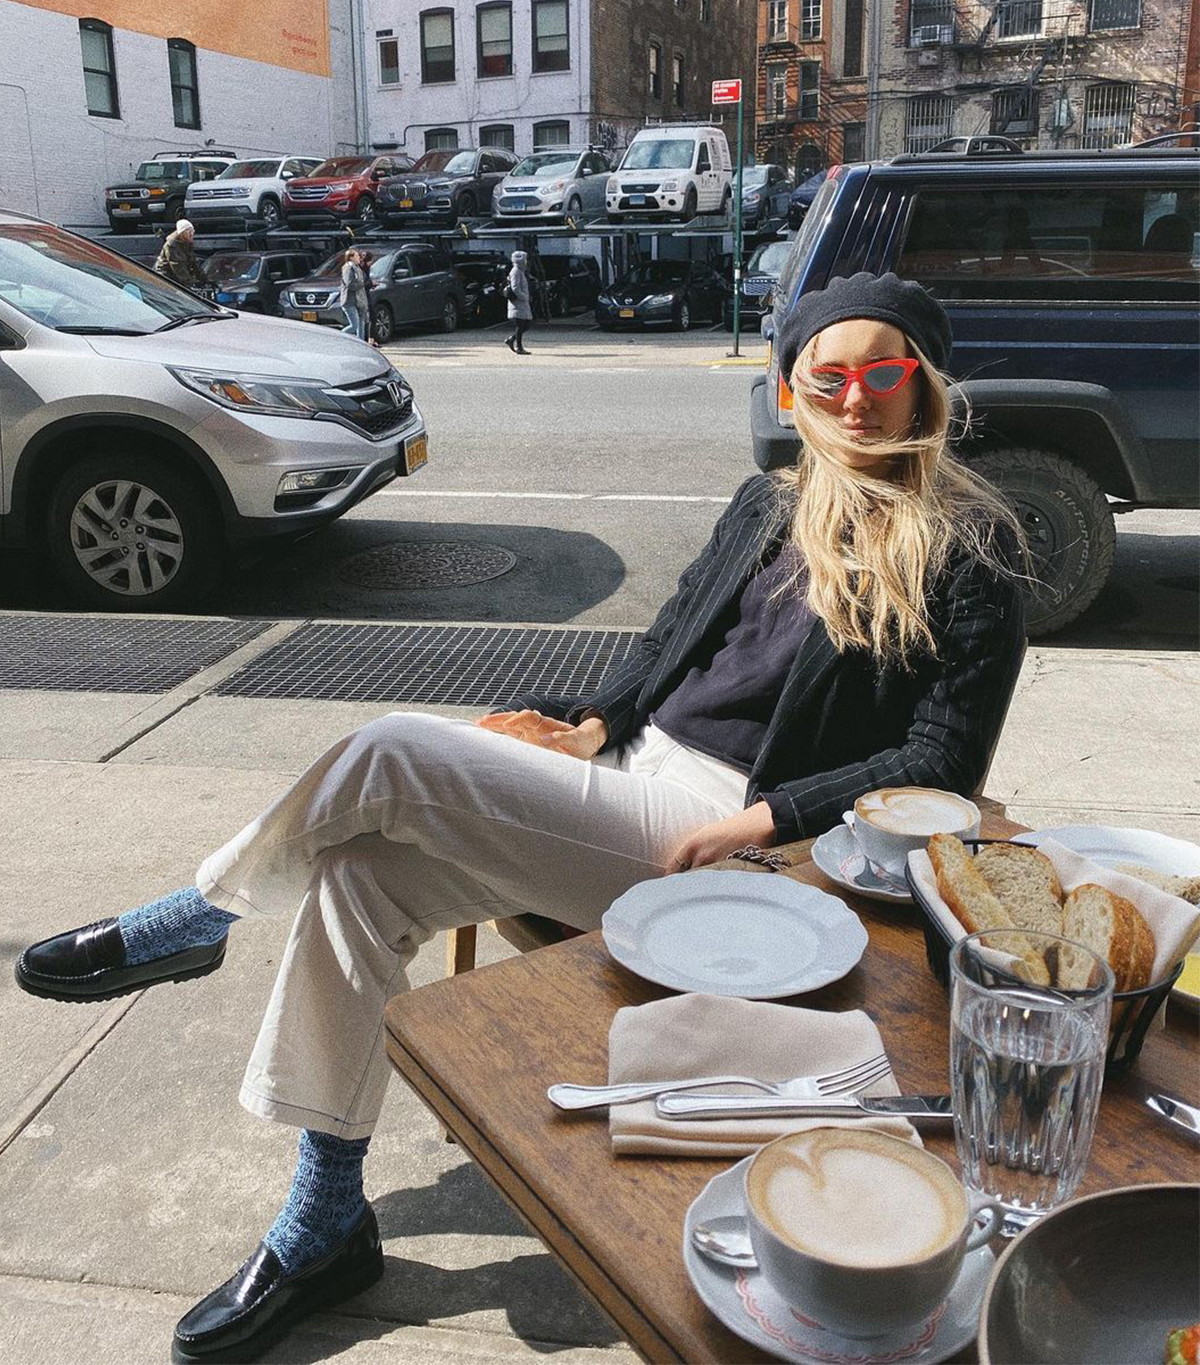 Outdoor dining outfit: wear warm accessories